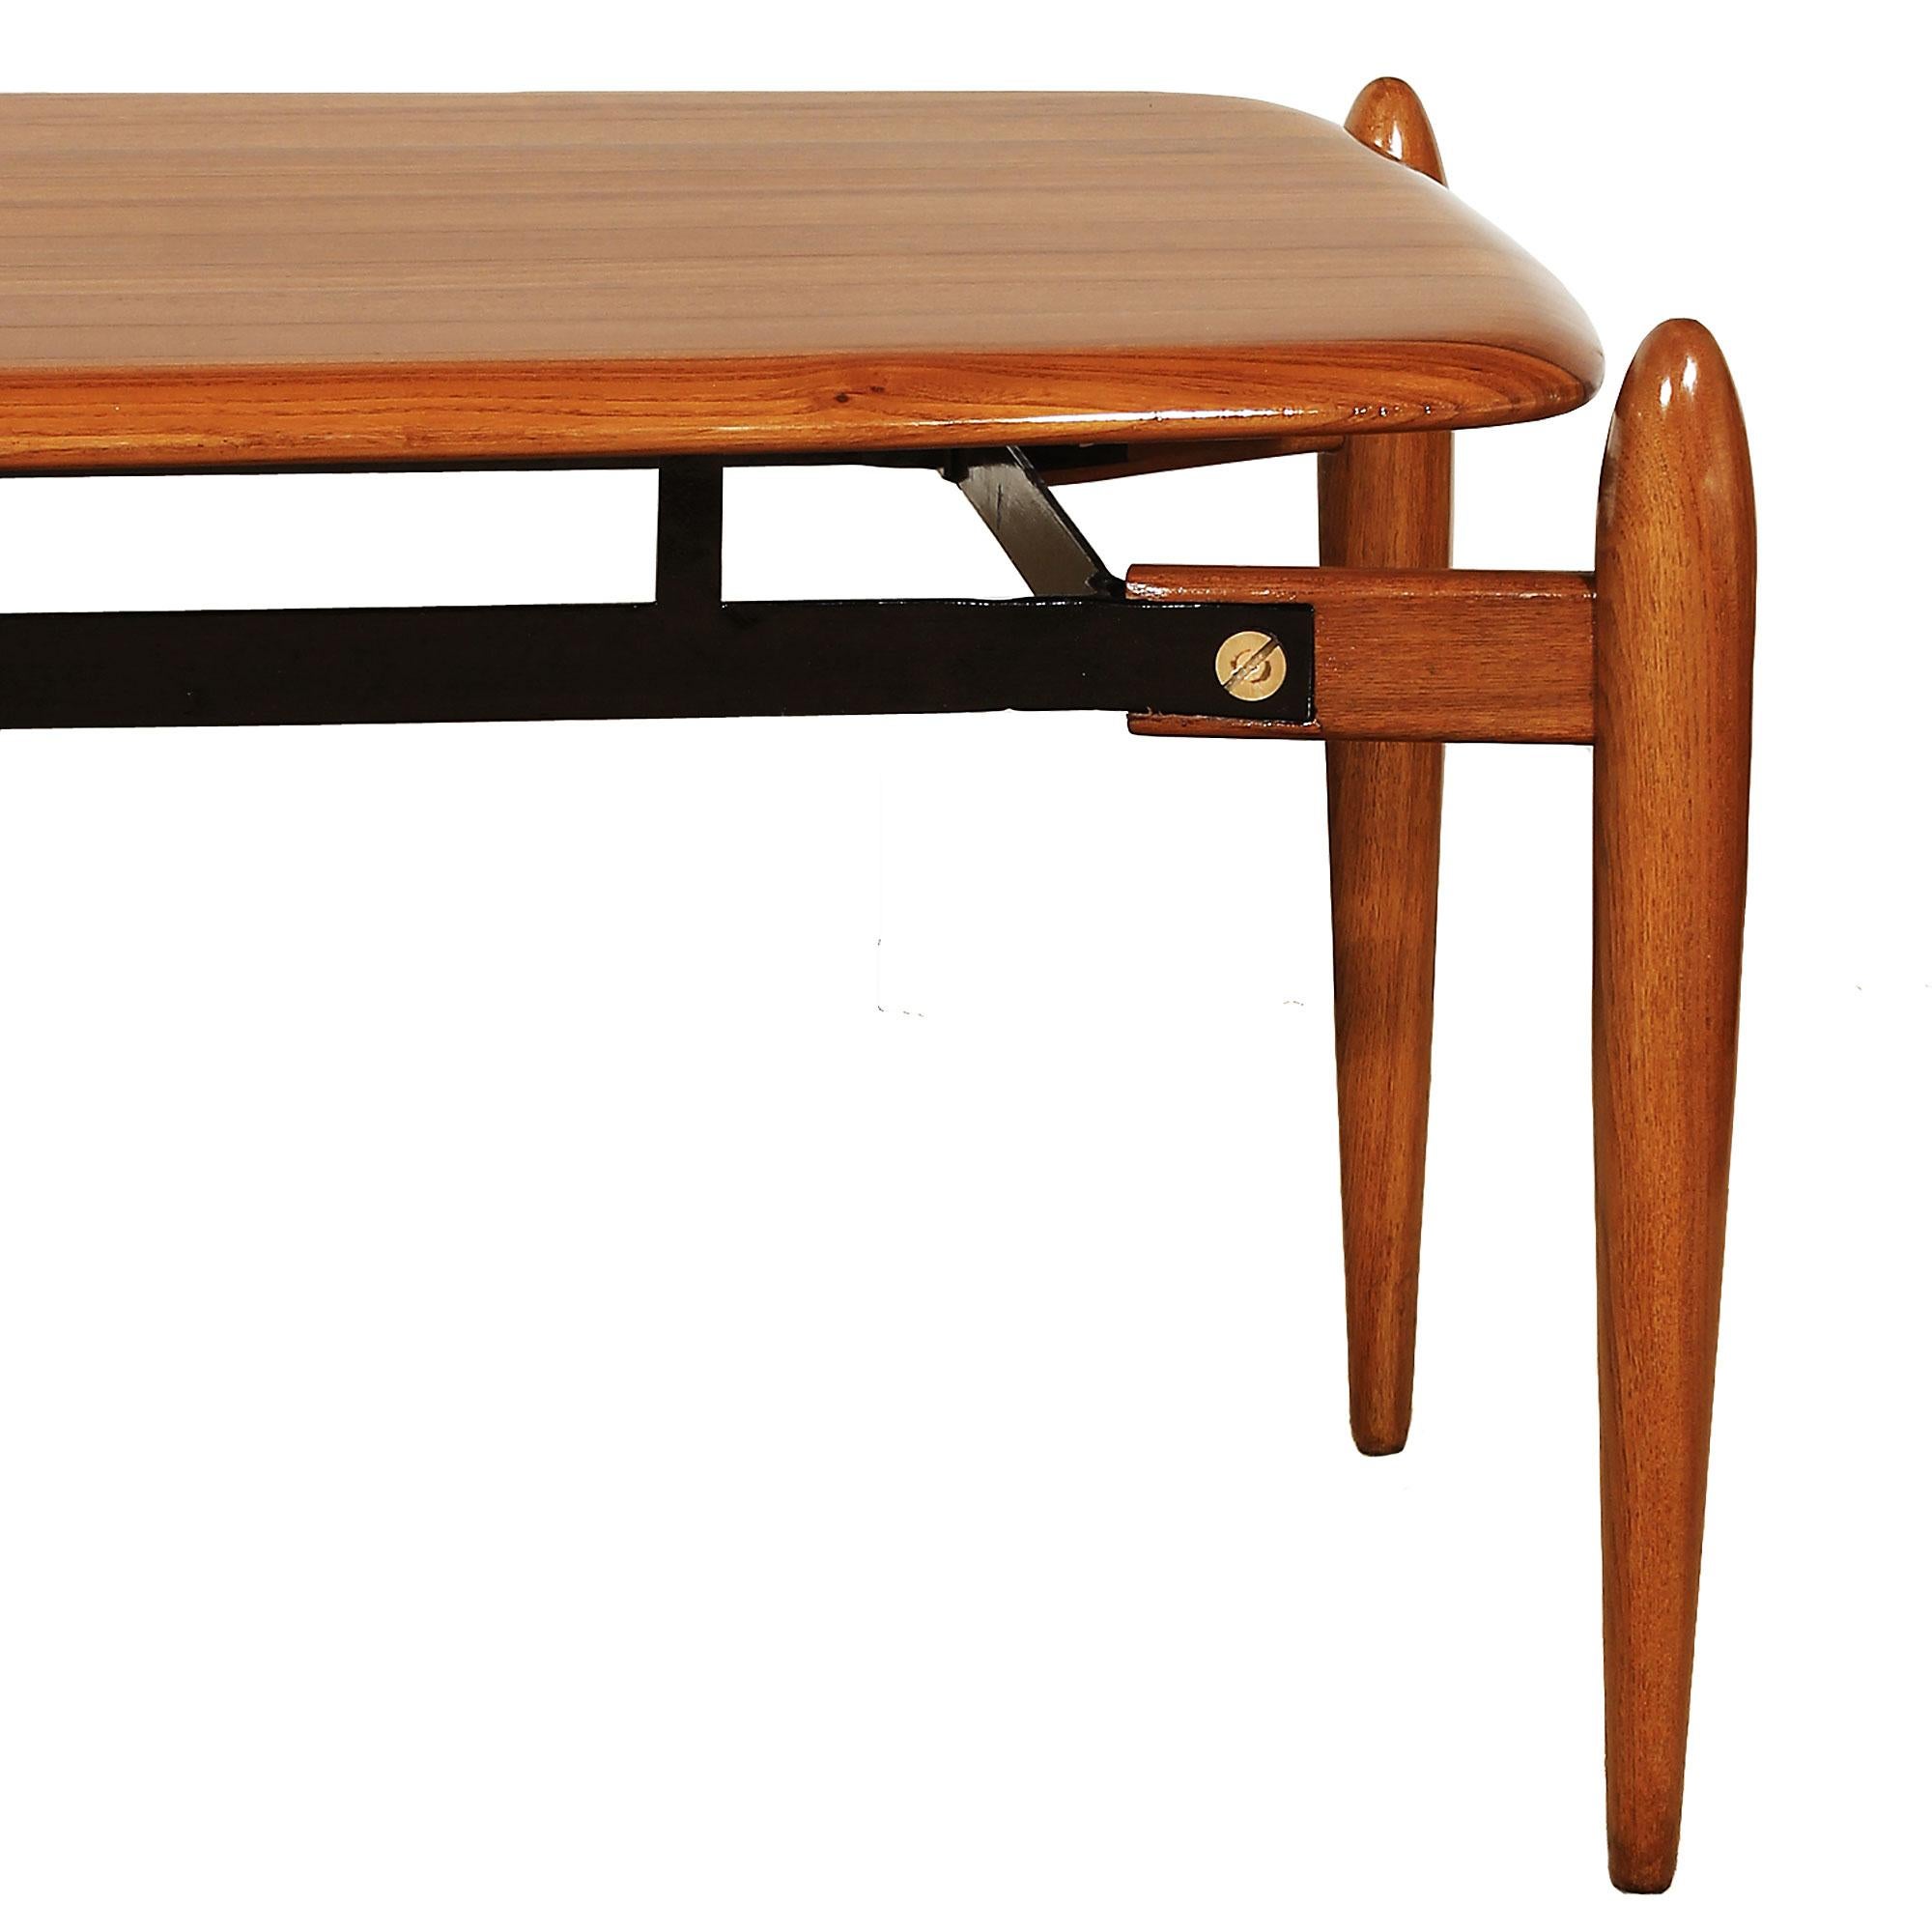 Italian Mid-Century Modern Coffee Table In Solid Teak With Ebony Strips  - Italy  For Sale